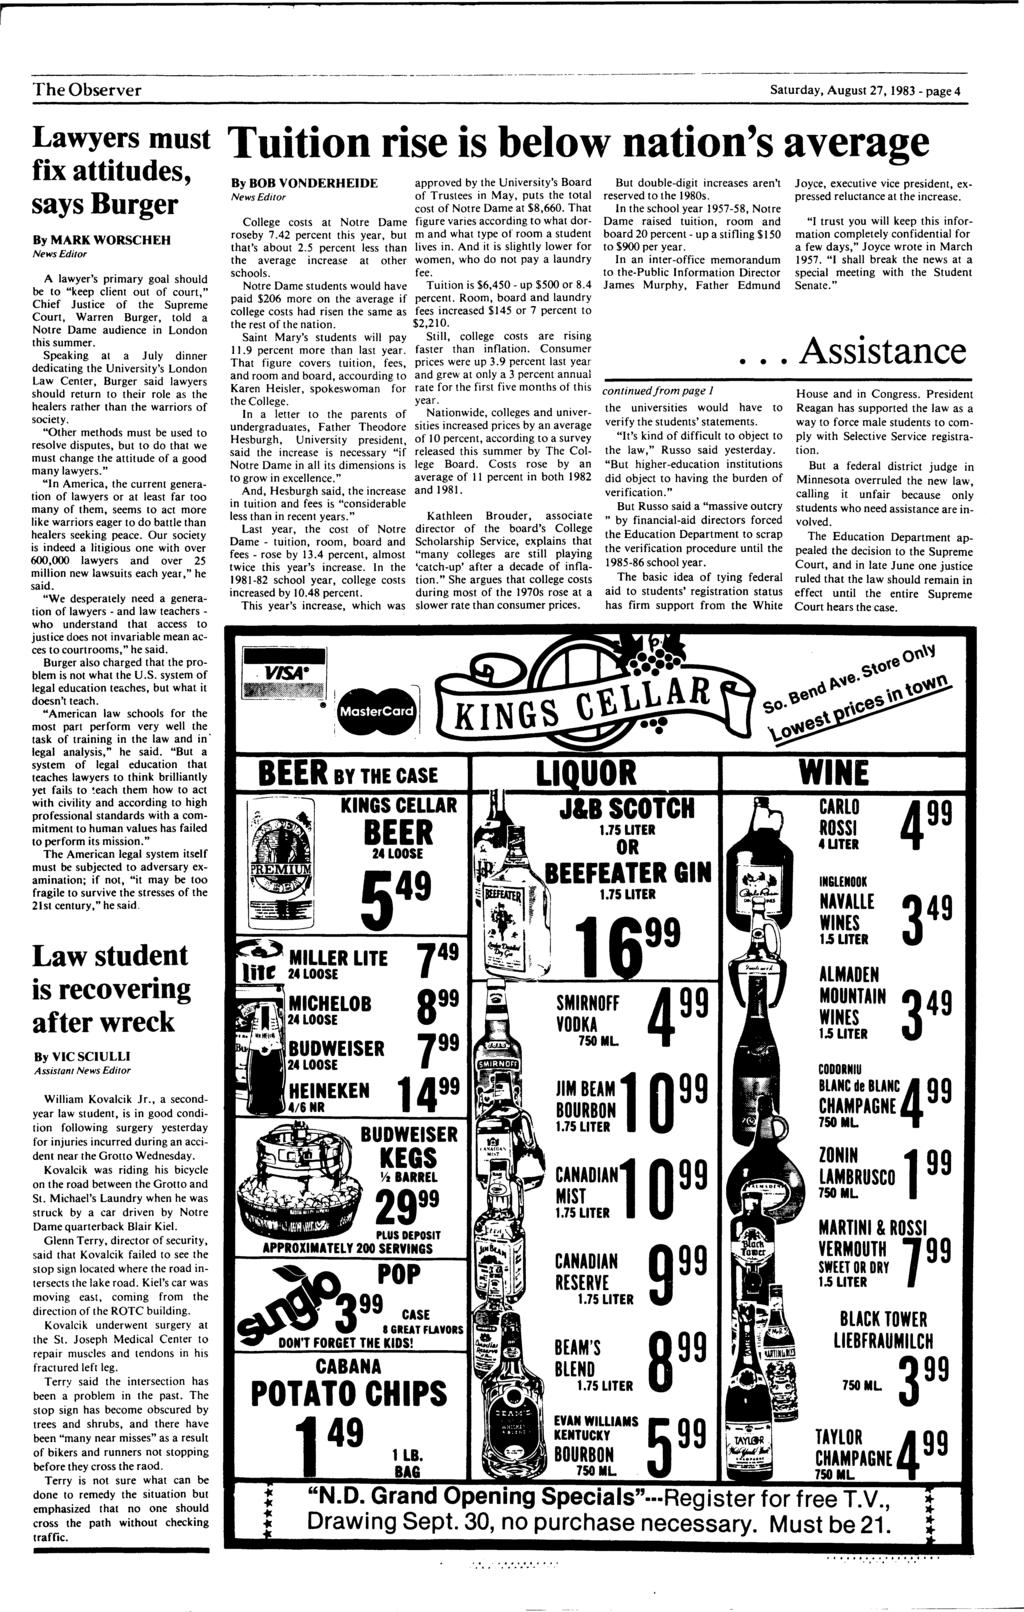 The Observer ------------- -------------- ------- Saurday, Augus 27, 1983 - page 4 Lawyers mus fix aiudes, says Burger By MARK WORSCHEH News Edior A lawyer's primary goal should be o "keep clien ou